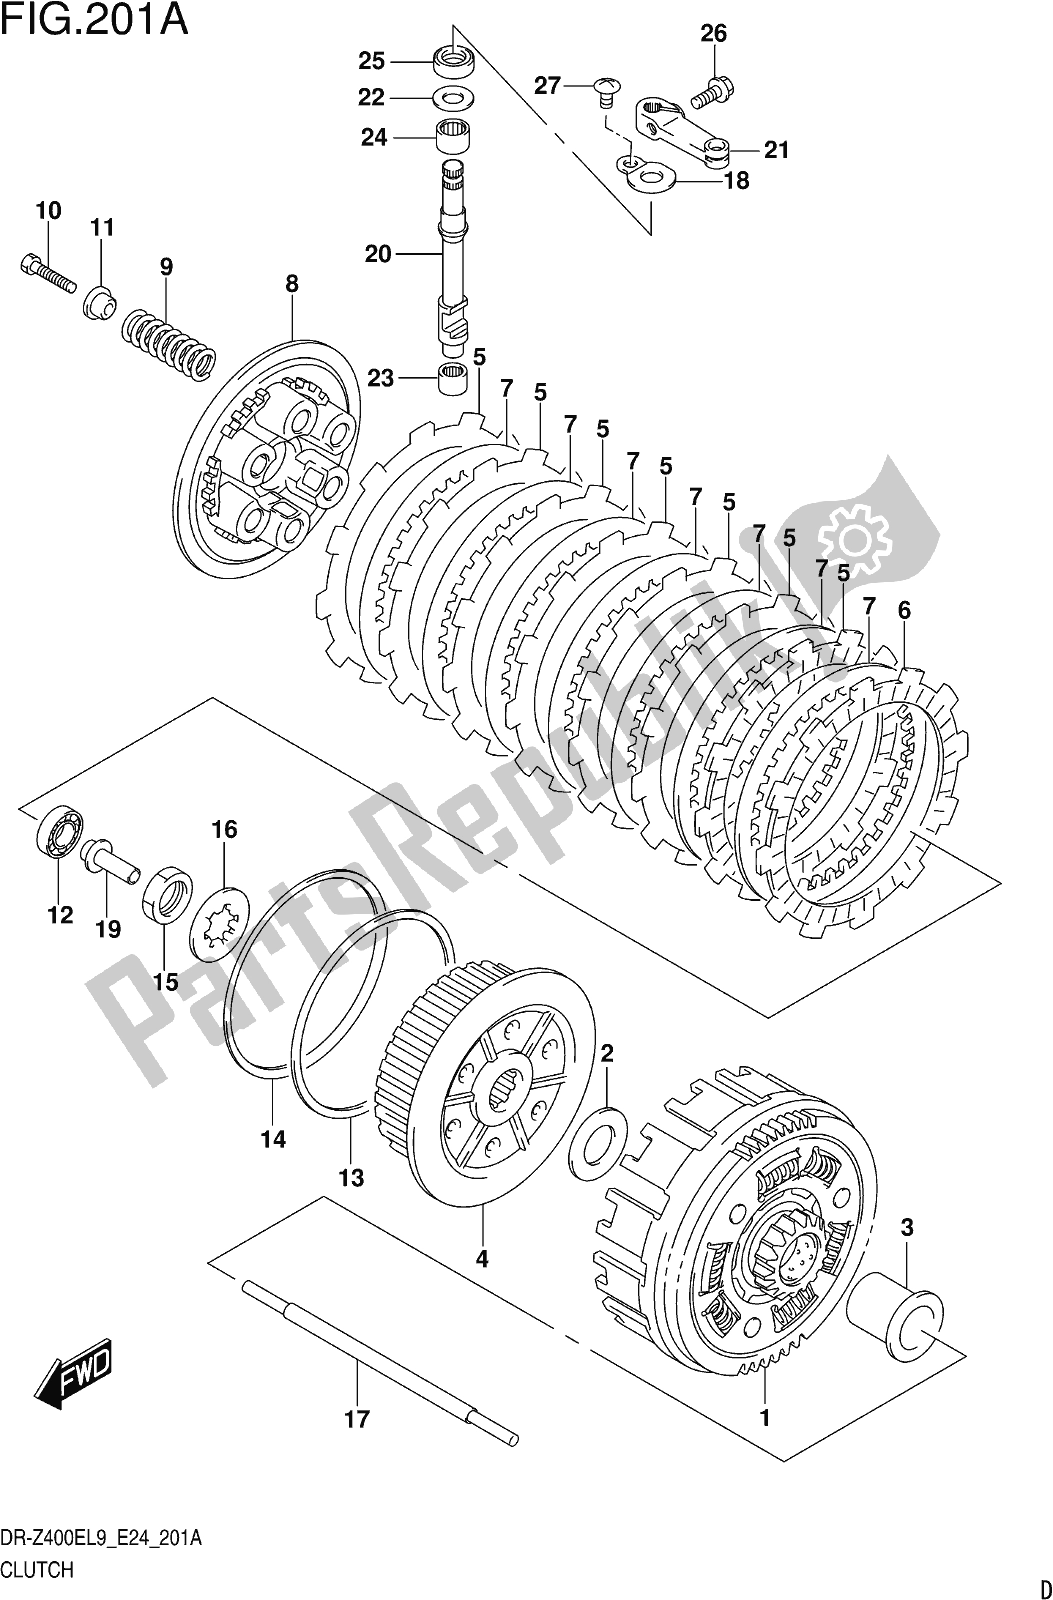 All parts for the Fig. 201a Clutch of the Suzuki DR-Z 400E 2019